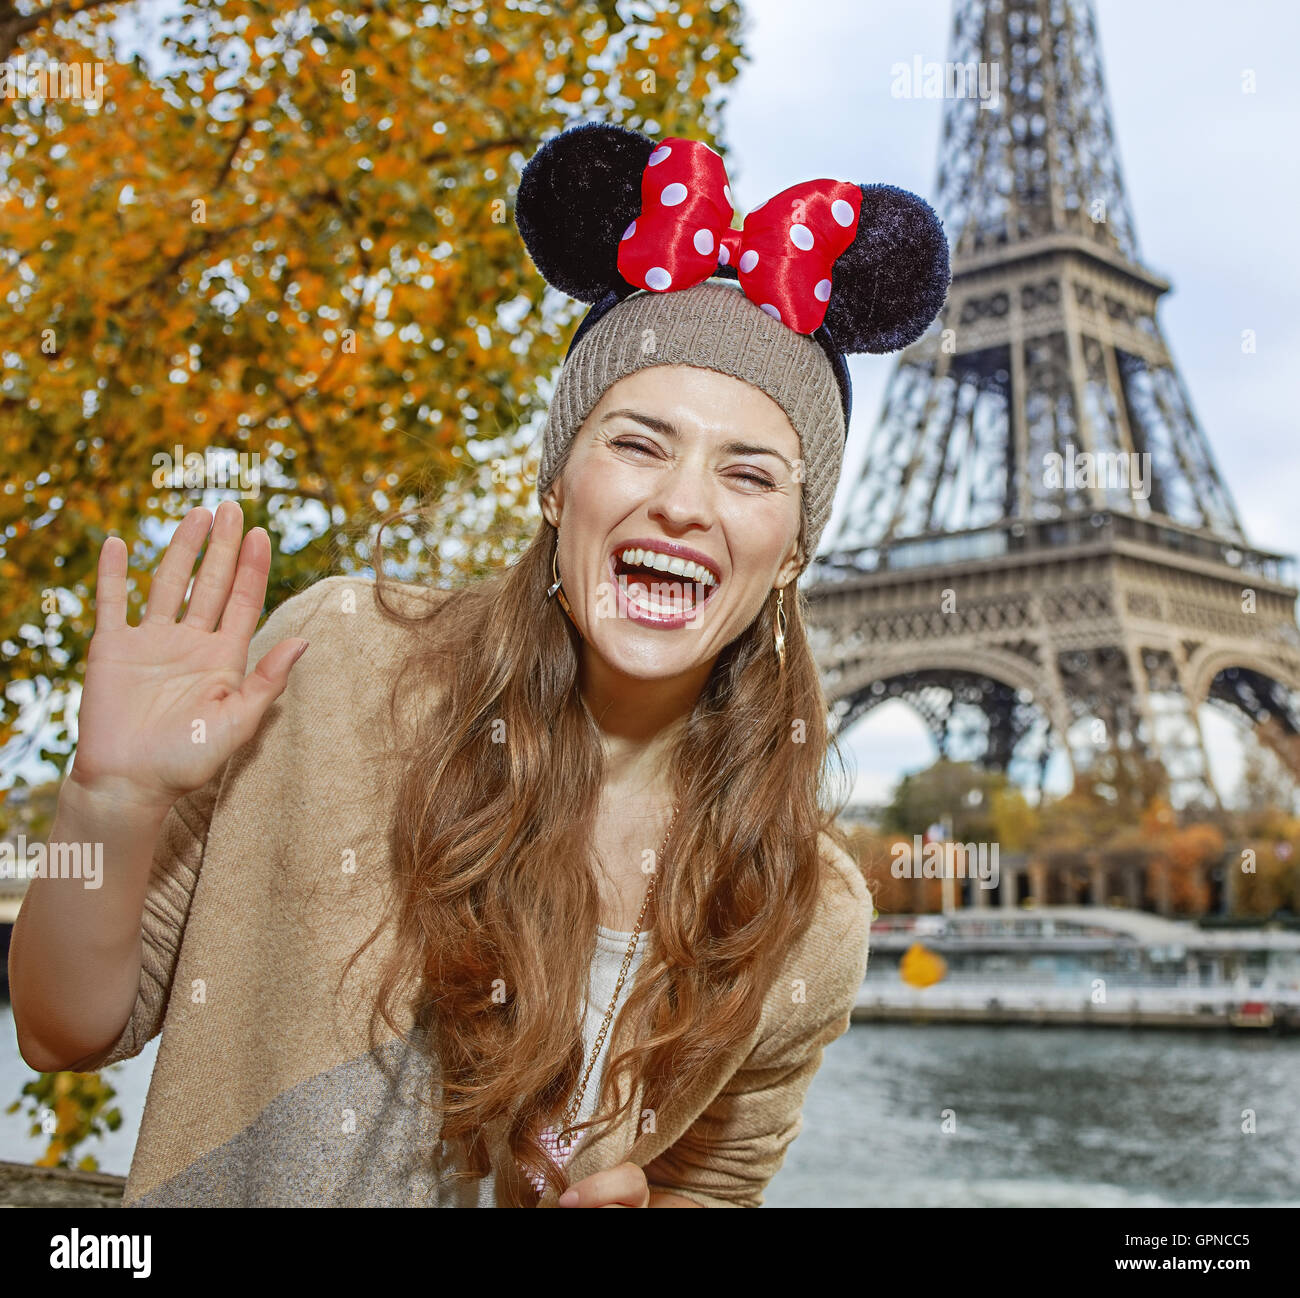 Perfect autumn holidays in Disneyland and Paris. Portrait of happy tourist woman wearing Minnie Mouse Ears handwaving on embankm Stock Photo